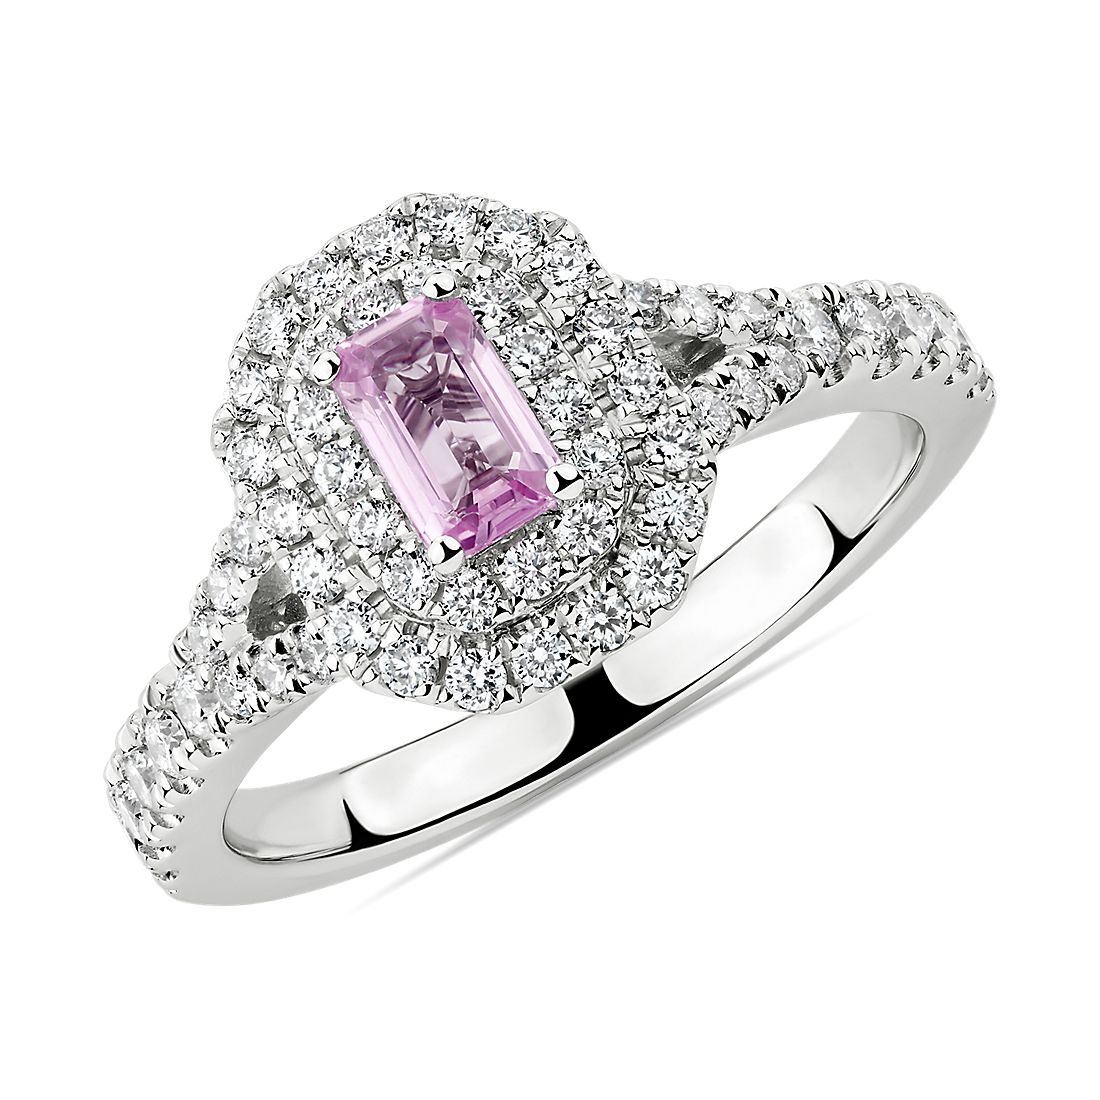 Emerald Cut Pink Sapphire Double Halo Ring in 14k White Gold (5x3mm)